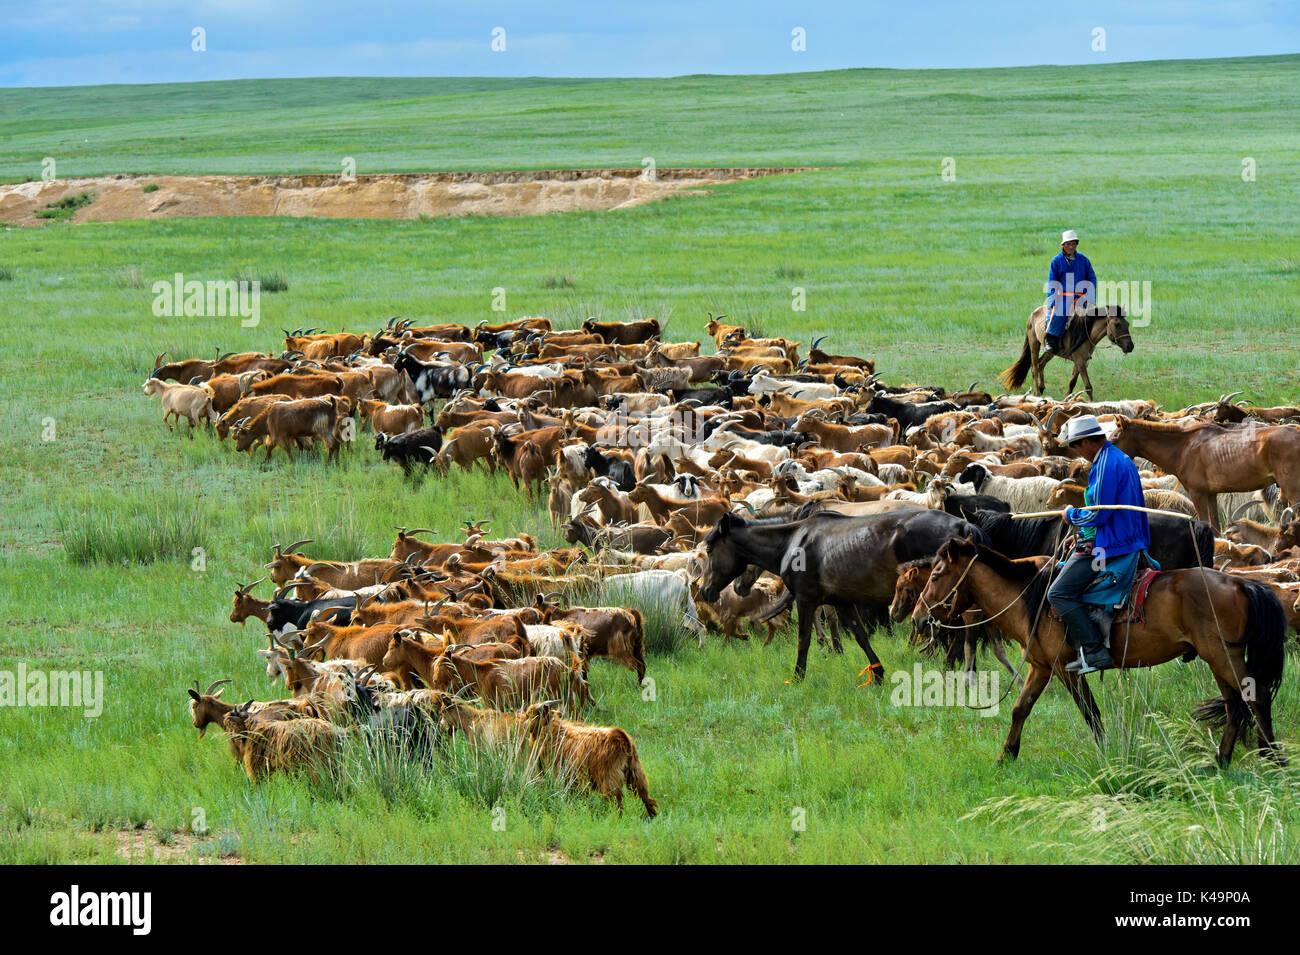 A Herd Of Kashmir Goats In The Mongolian Steppe, Mongolia Stock Photo